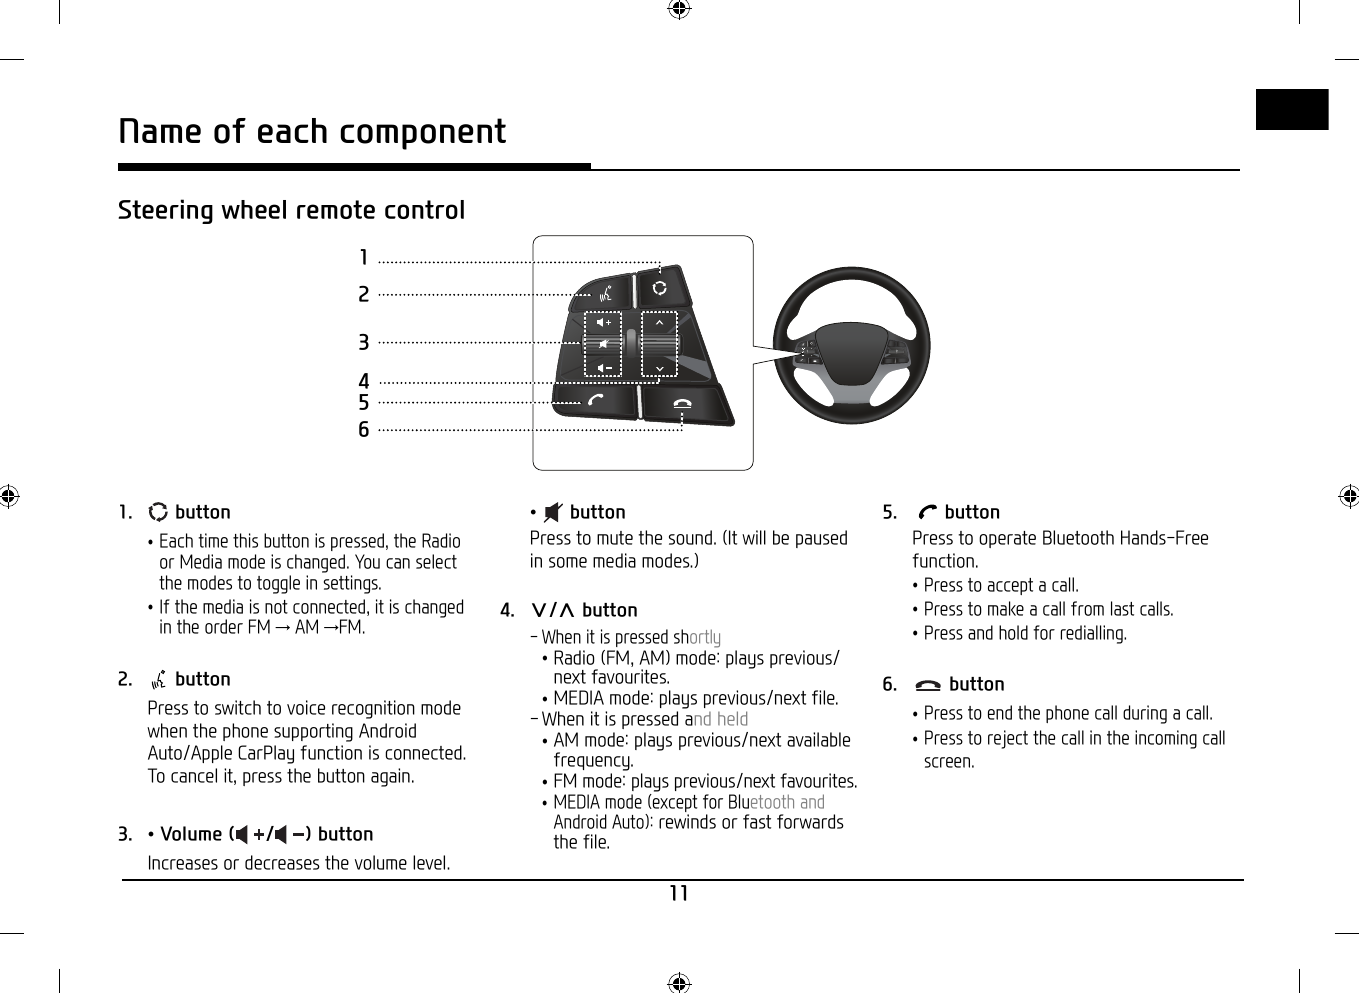 11Name of each componentSteering wheel remote control1562341. button•Each time this button is pressed, the Radioor Media mode is changed. You can selectthe modes to toggle in settings.•If the media is not connected, it is changedin the order FM → AM →FM.2. buttonPress to switch to voice recognition mode when the phone supporting Android Auto/Apple CarPlay function is connected.To cancel it, press the button again.3. • Volume ( / ) buttonIncreases or decreases the volume level.•buttonPress to mute the sound. (It will be paused in some media modes.)4. S/W button - When it is pressed shortly•Radio (FM, AM) mode: plays previous/next favourites.•MEDIA mode: plays previous/next file. - When it is pressed and held•AM mode: plays previous/next availablefrequency.•FM mode: plays previous/next favourites.•MEDIA mode (except for Bluetooth andAndroid Auto): rewinds or fast forwardsthe file.5. buttonPress to operate Bluetooth Hands-Free function.•Press to accept a call.•Press to make a call from last calls.•Press and hold for redialling.6. button•Press to end the phone call during a call.•Press to reject the call in the incoming callscreen.